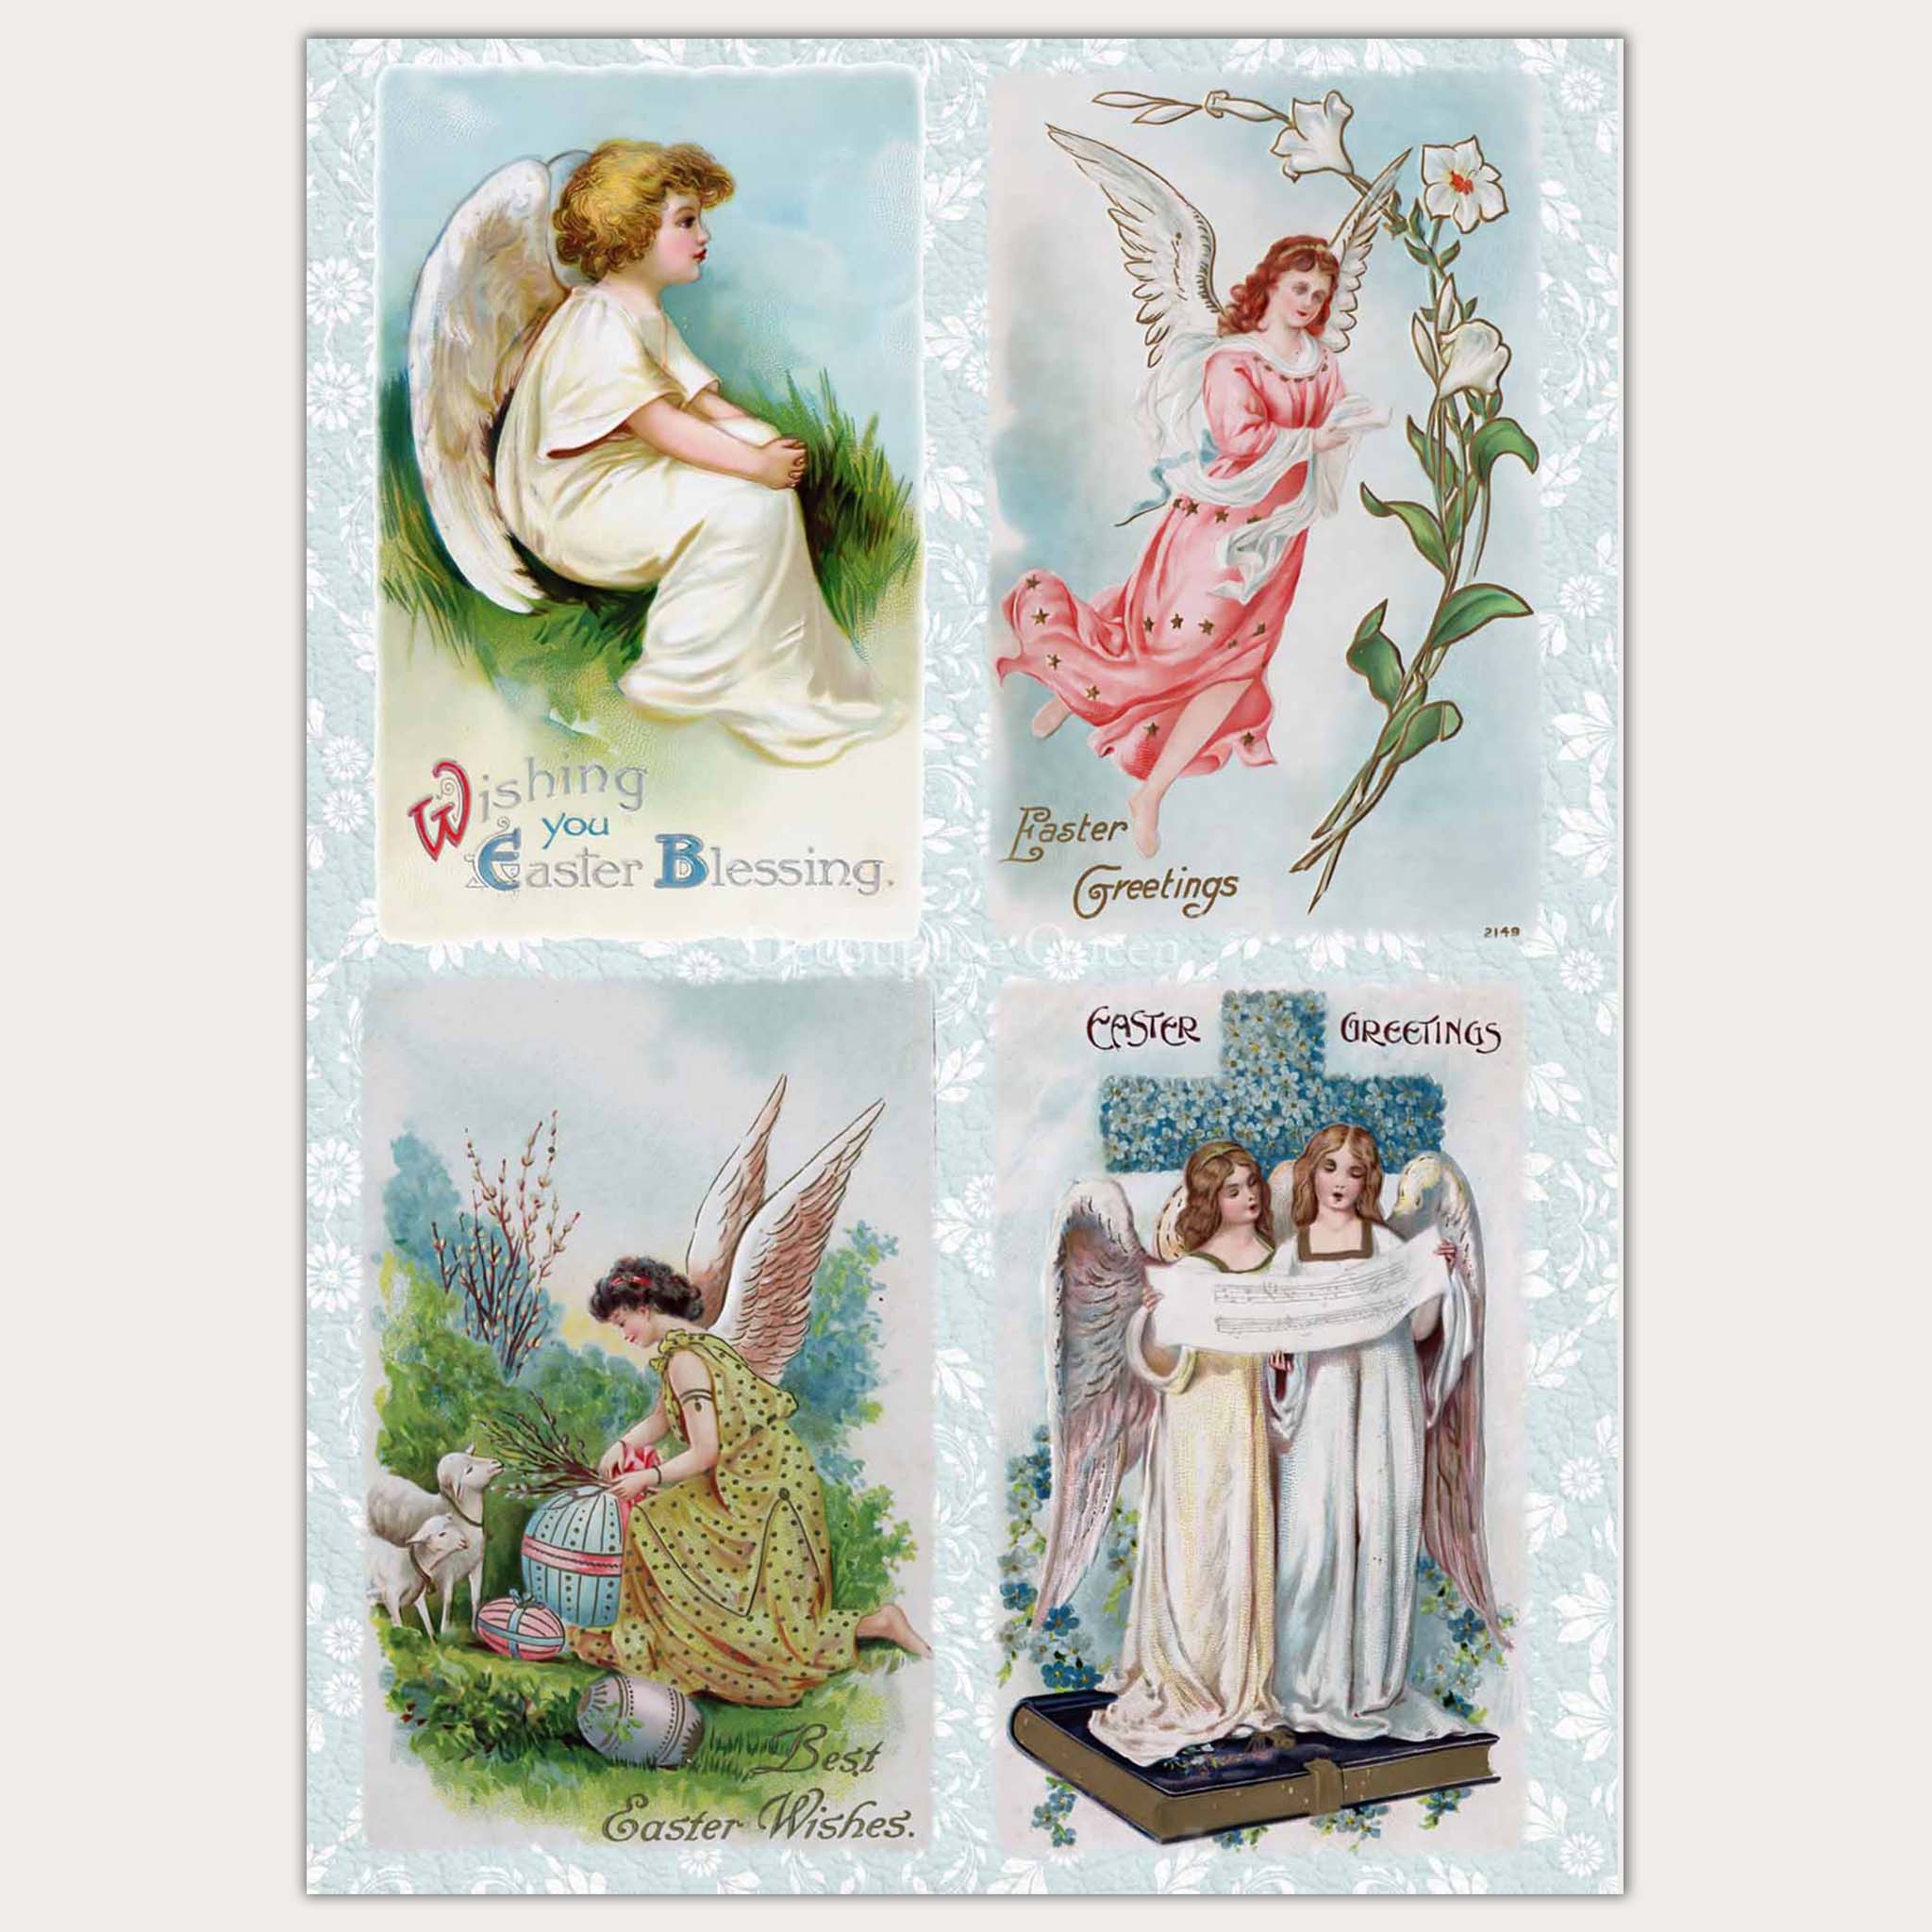 A4 rice paper design that features 4 scenes of Easter angels on a light blue floral background. Cream colored borders are on the sides.